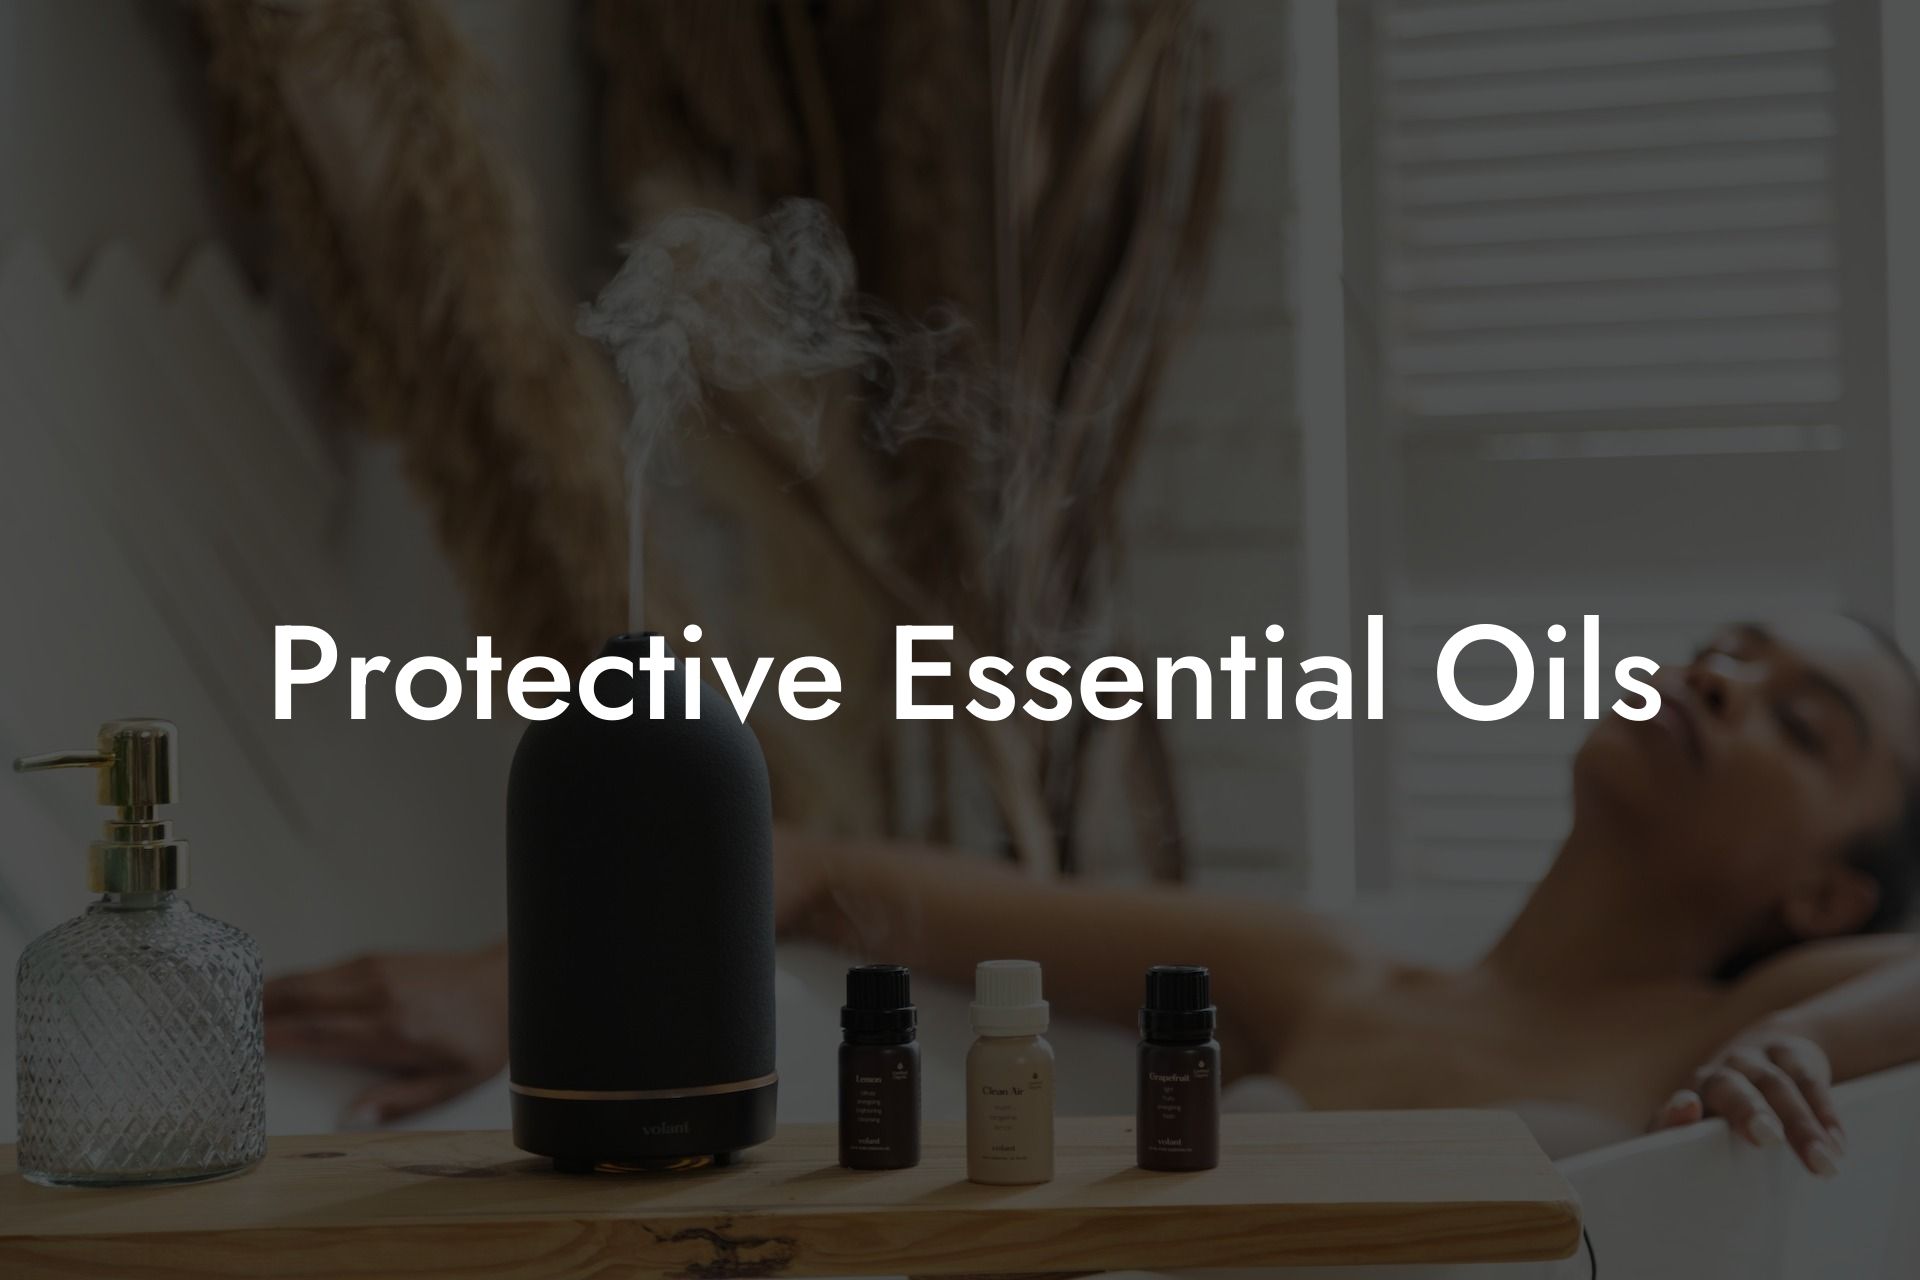 Protective Essential Oils